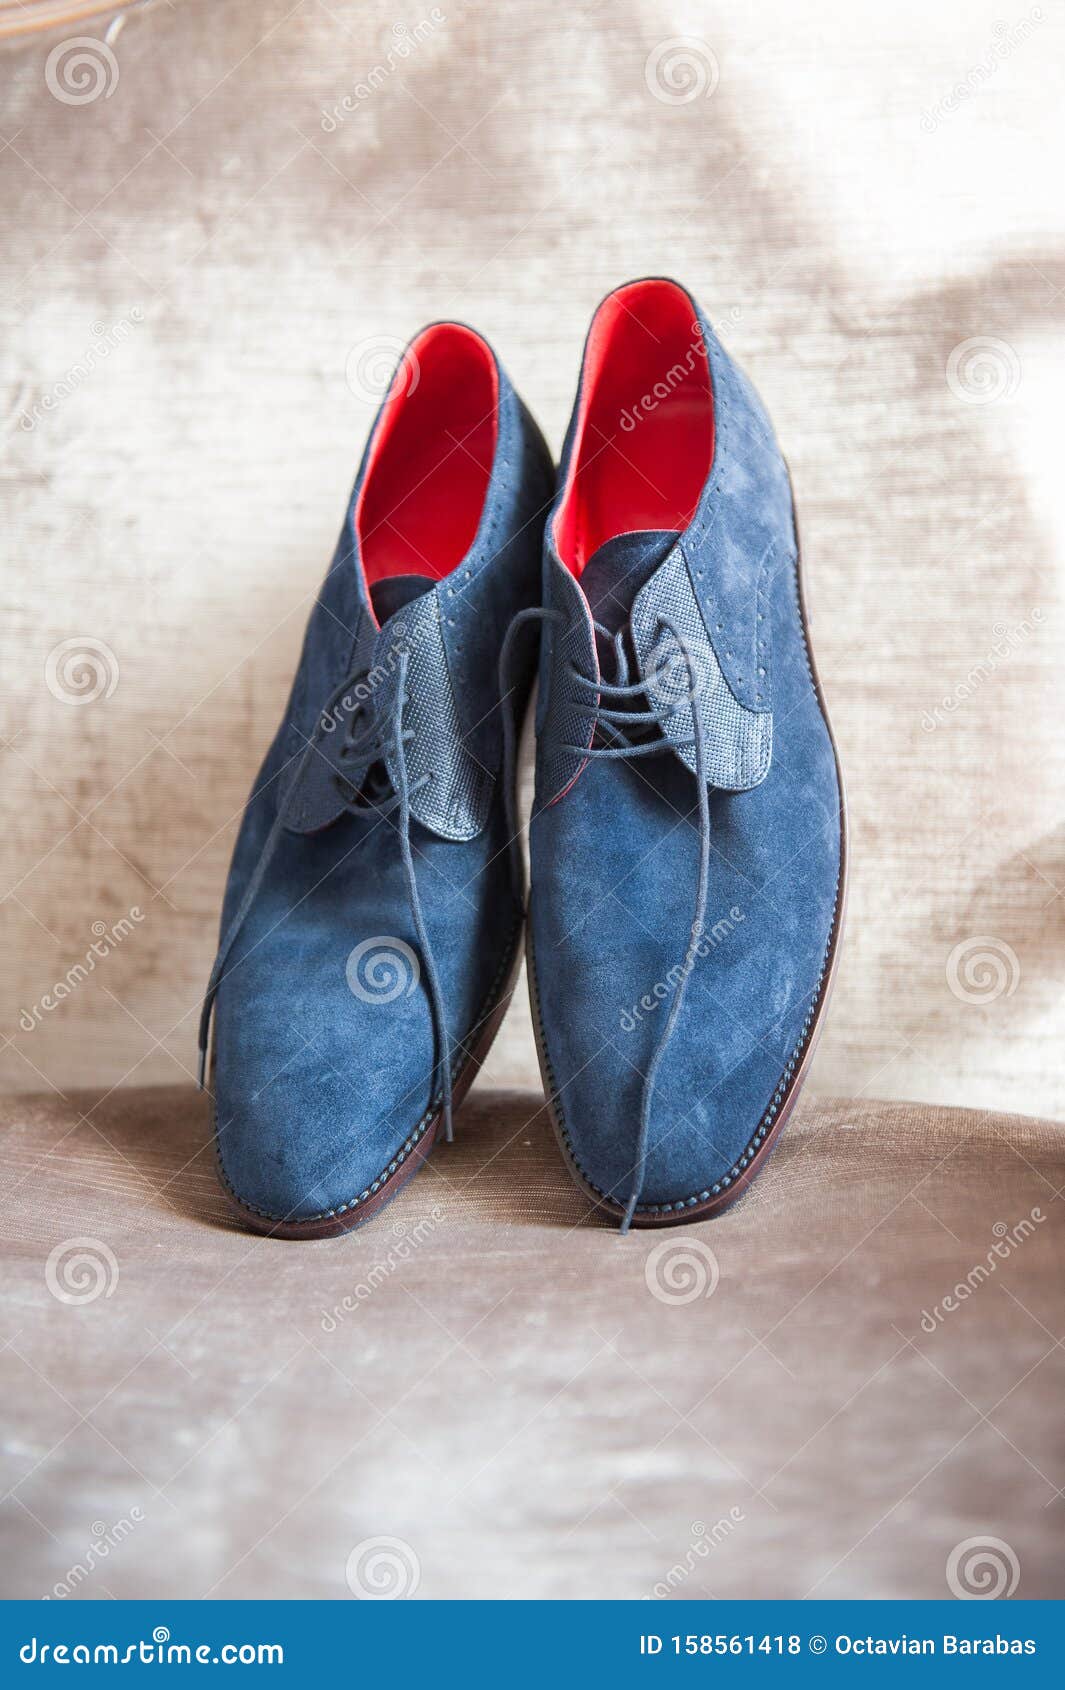 Pair of Blue Sued Shoes for Men Stock Photo - Image of background ...